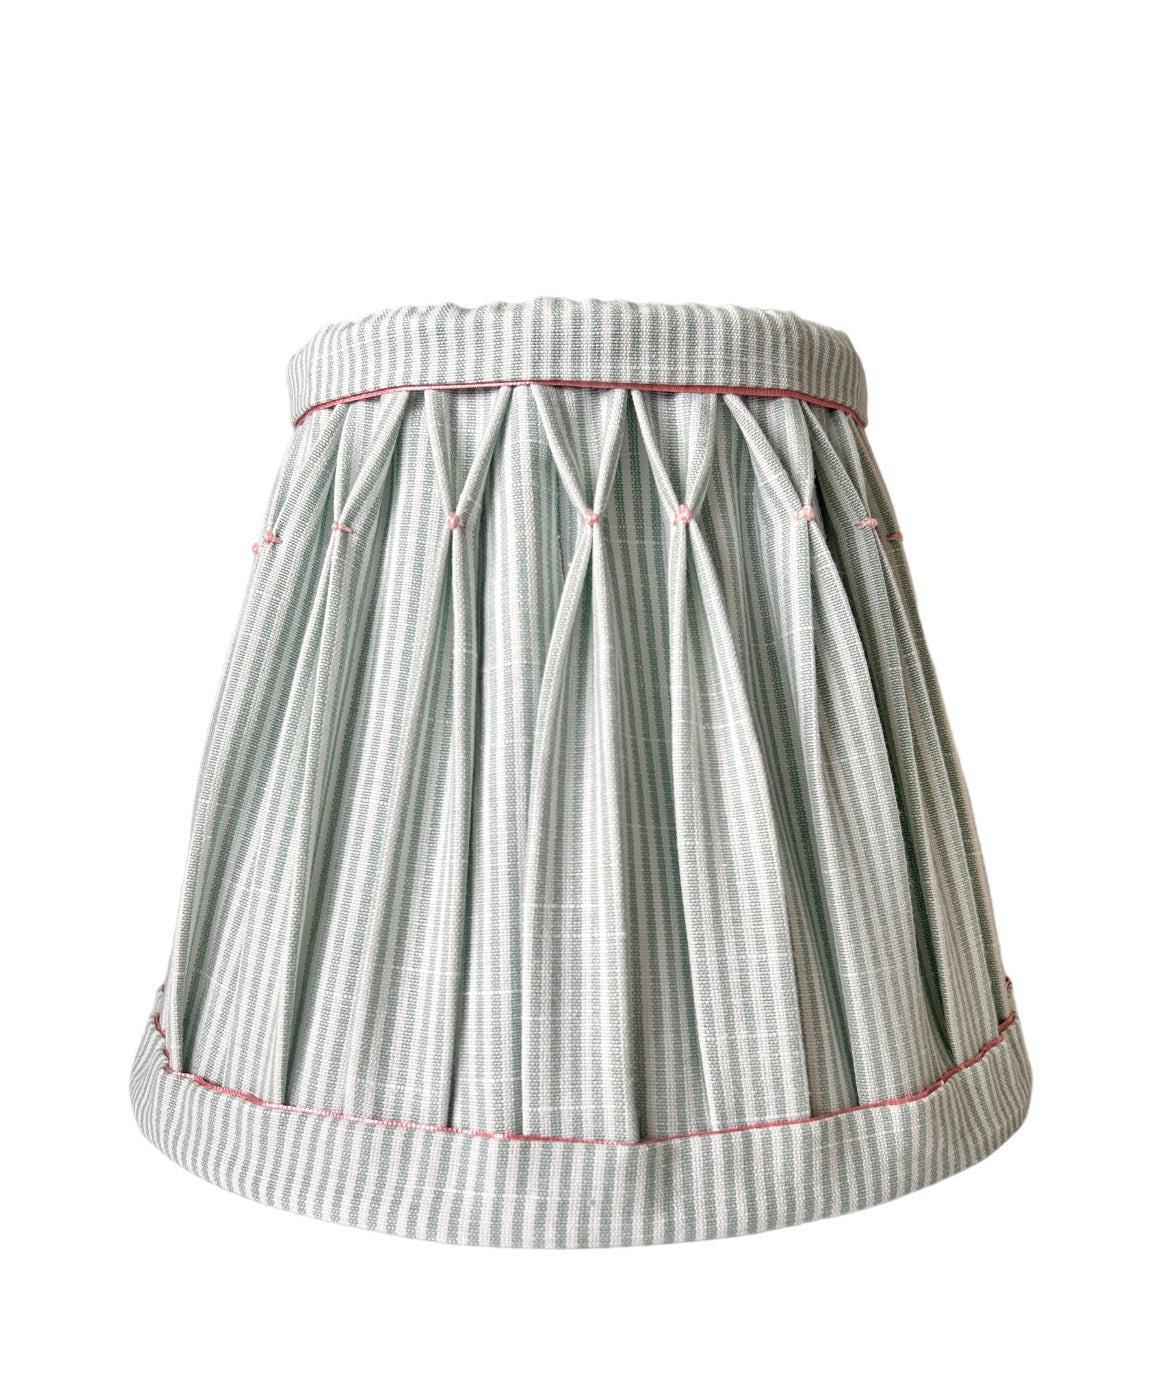 Duck Egg Stripe Box Pleat French Knot Soft Lampshade